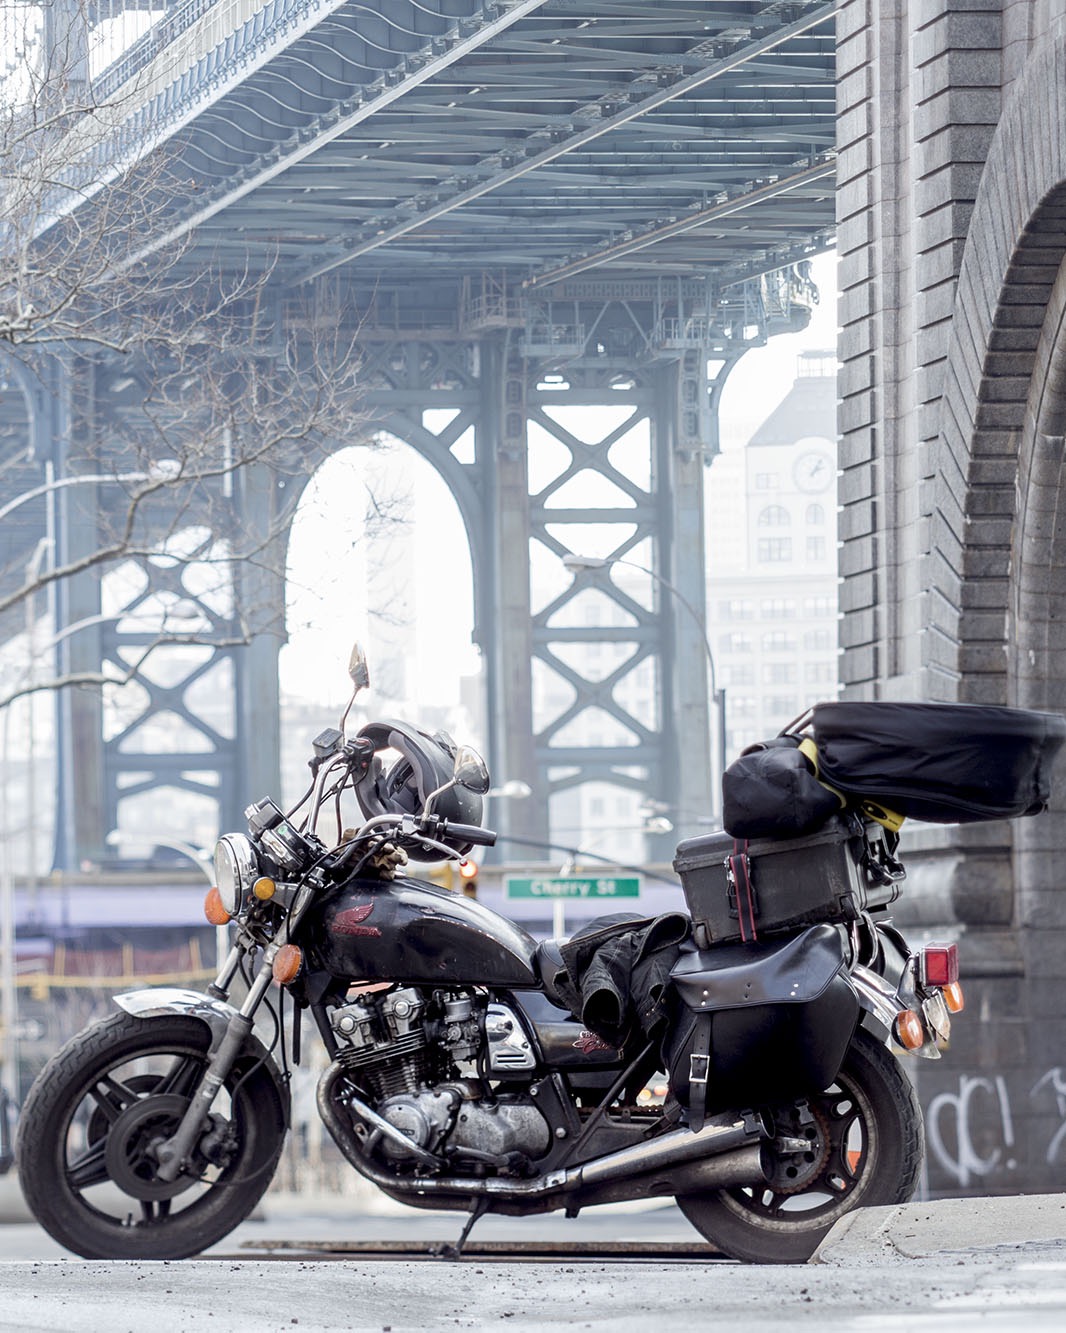 A motorcyle loaded with camera equipment in New York City